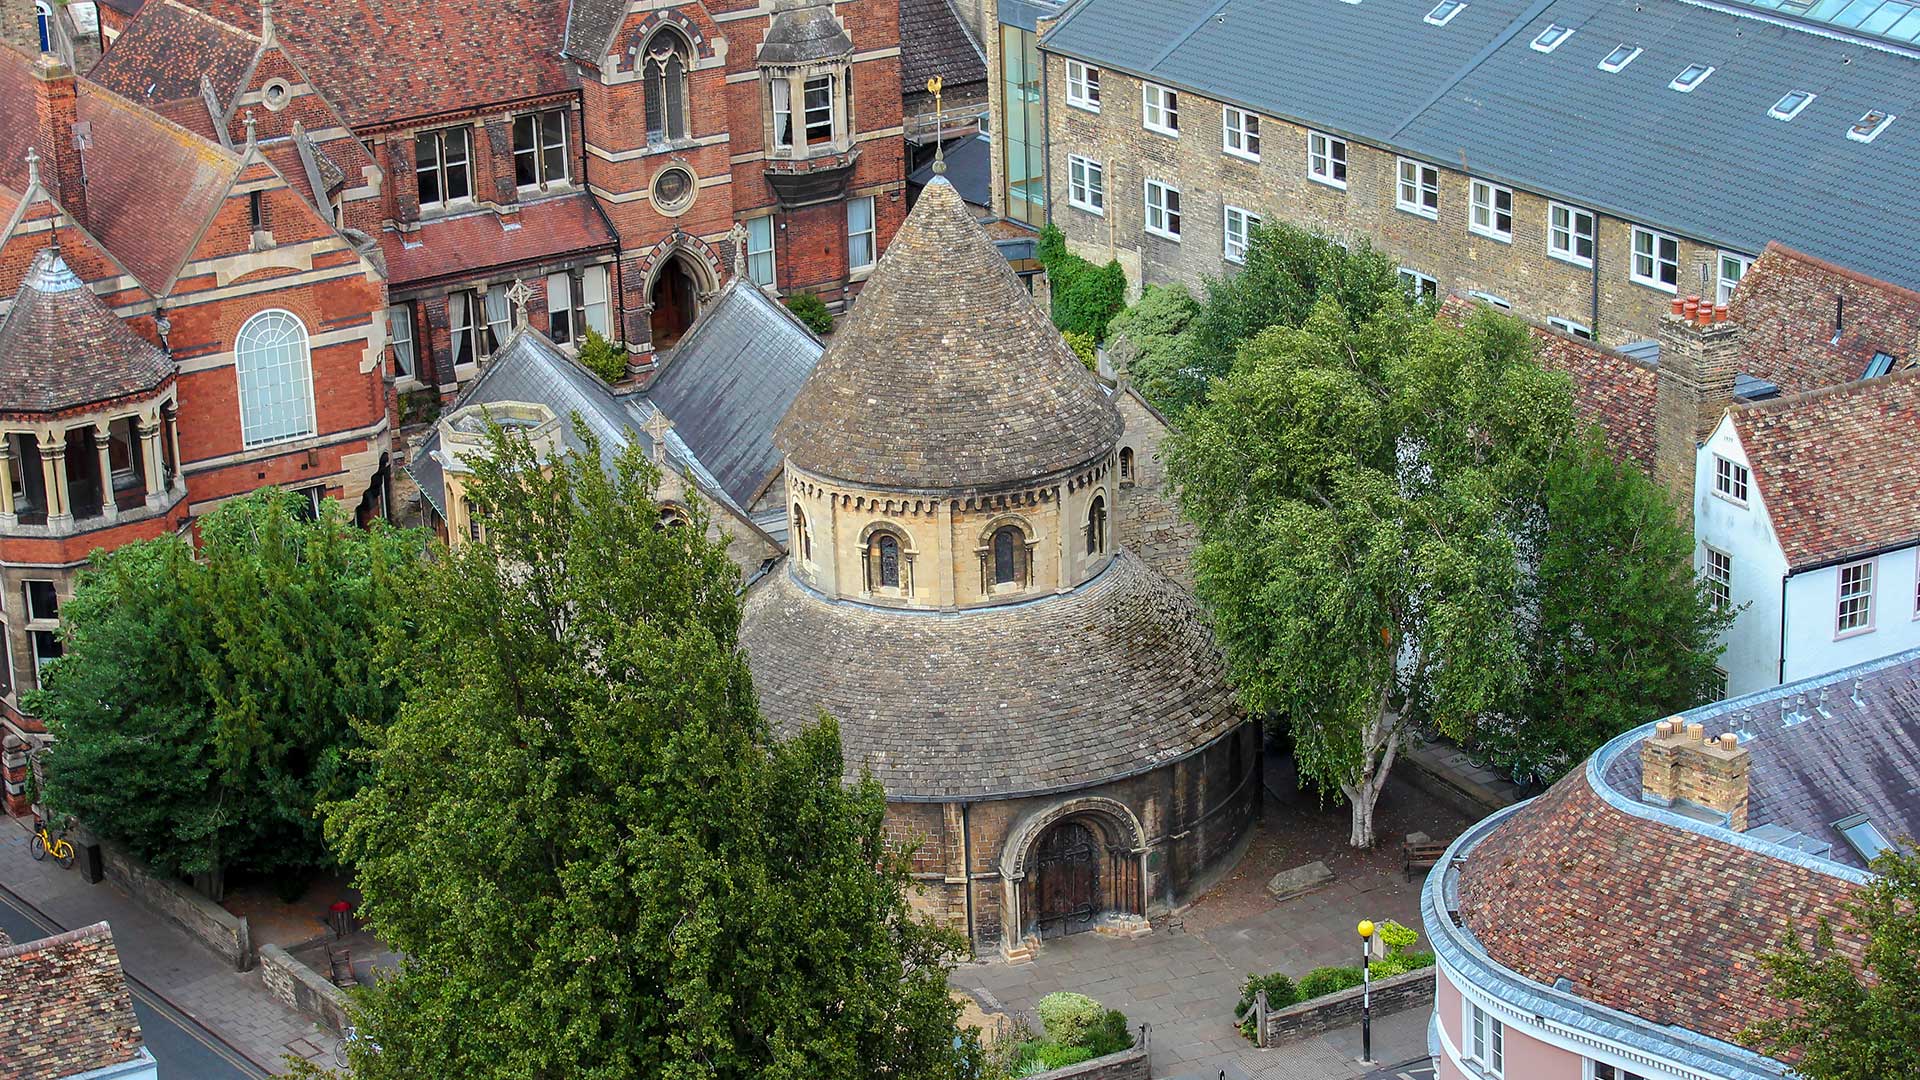 Aerial photograph of the Round Church Cambridge taken from the roof of St John's College Chapel